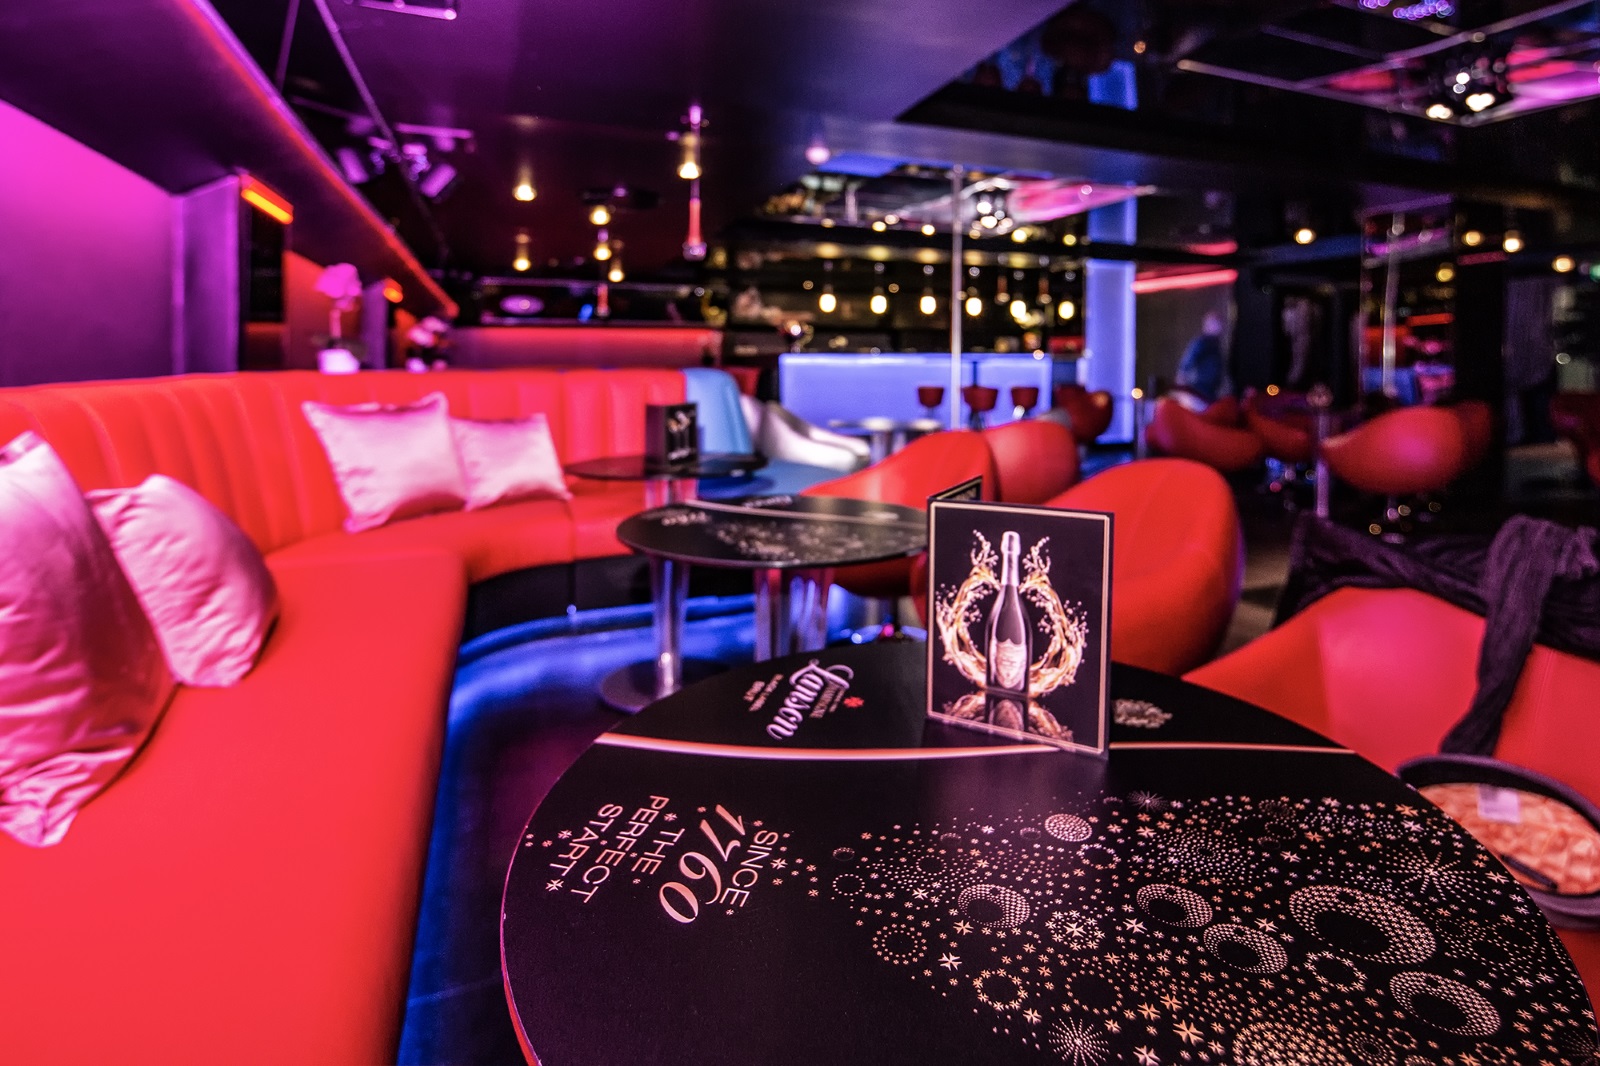 Gentlemens clubs in oklahoma city - 🧡 White's, London, England - Welc...